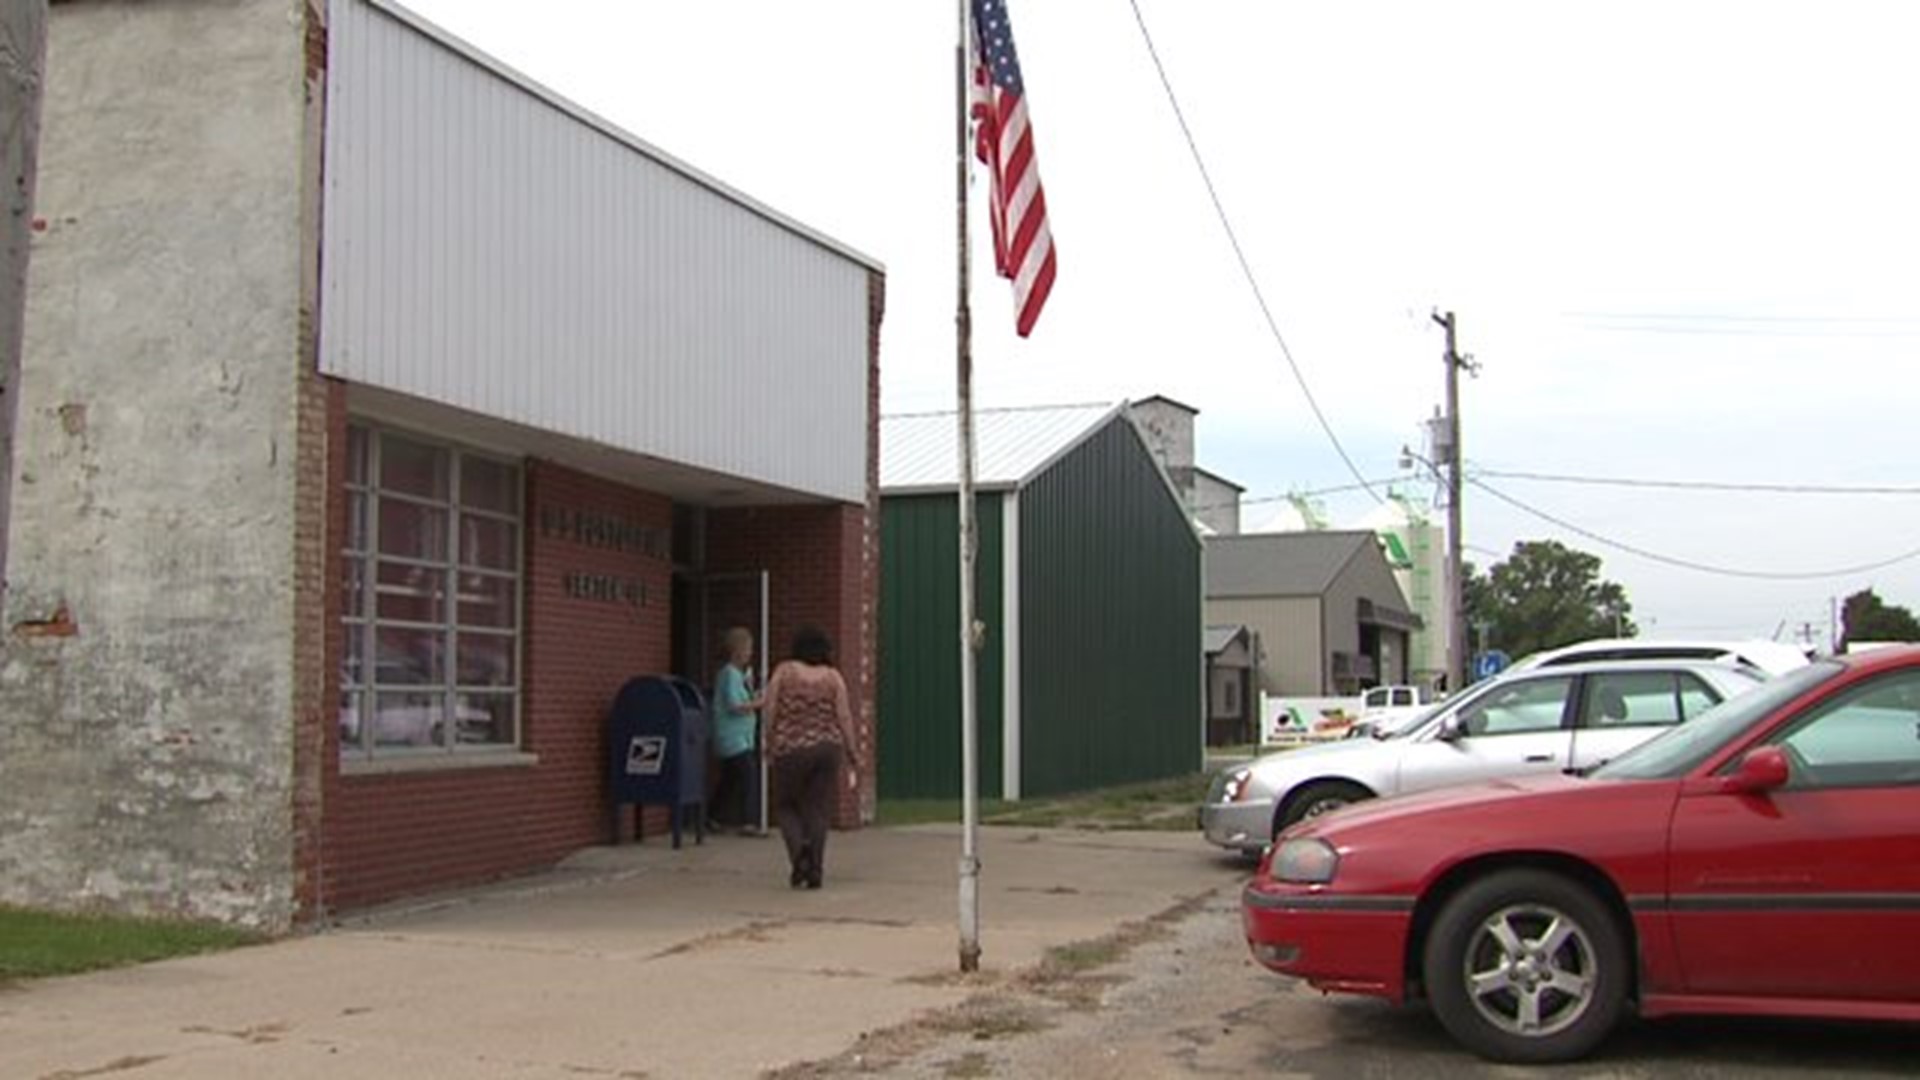 Village of Seaton post office temporarily relocates after black mold discovered